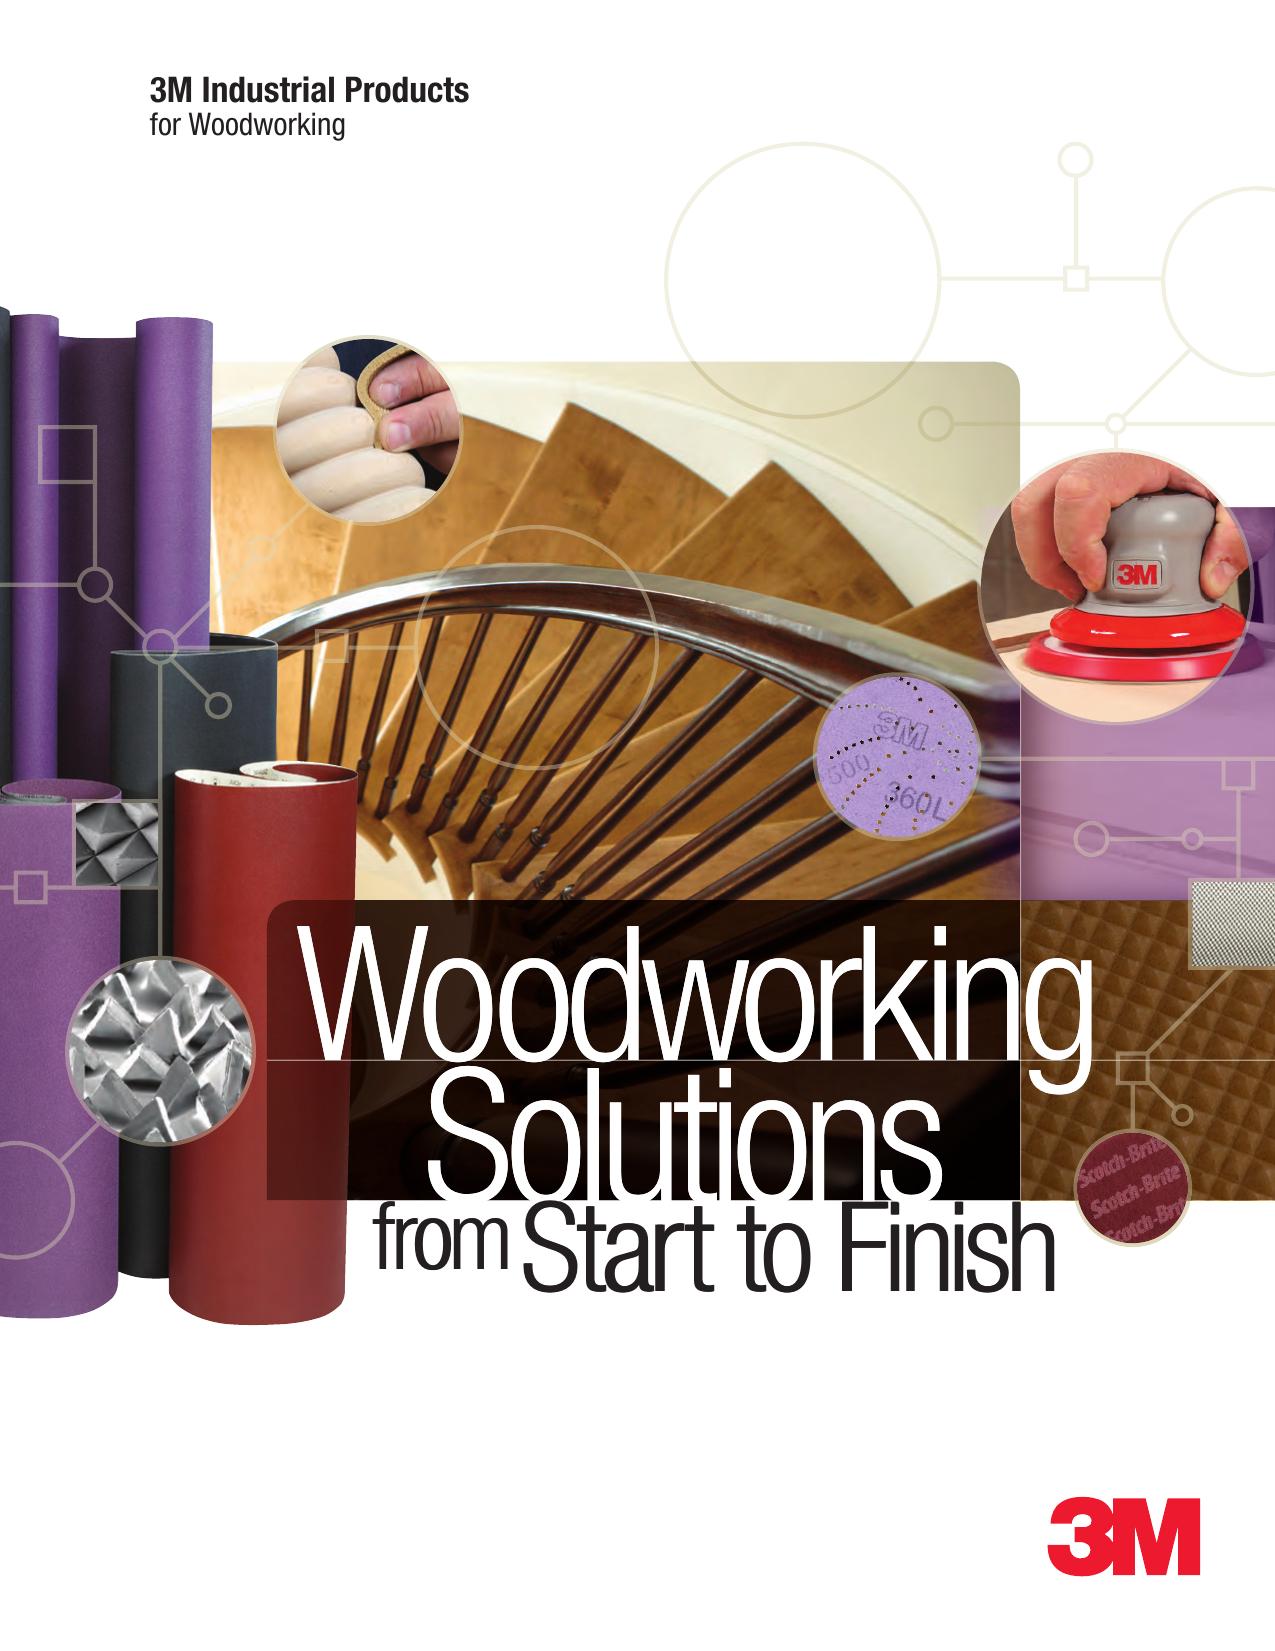 3M™ Industrial Products for Woodworking Catalog 2014